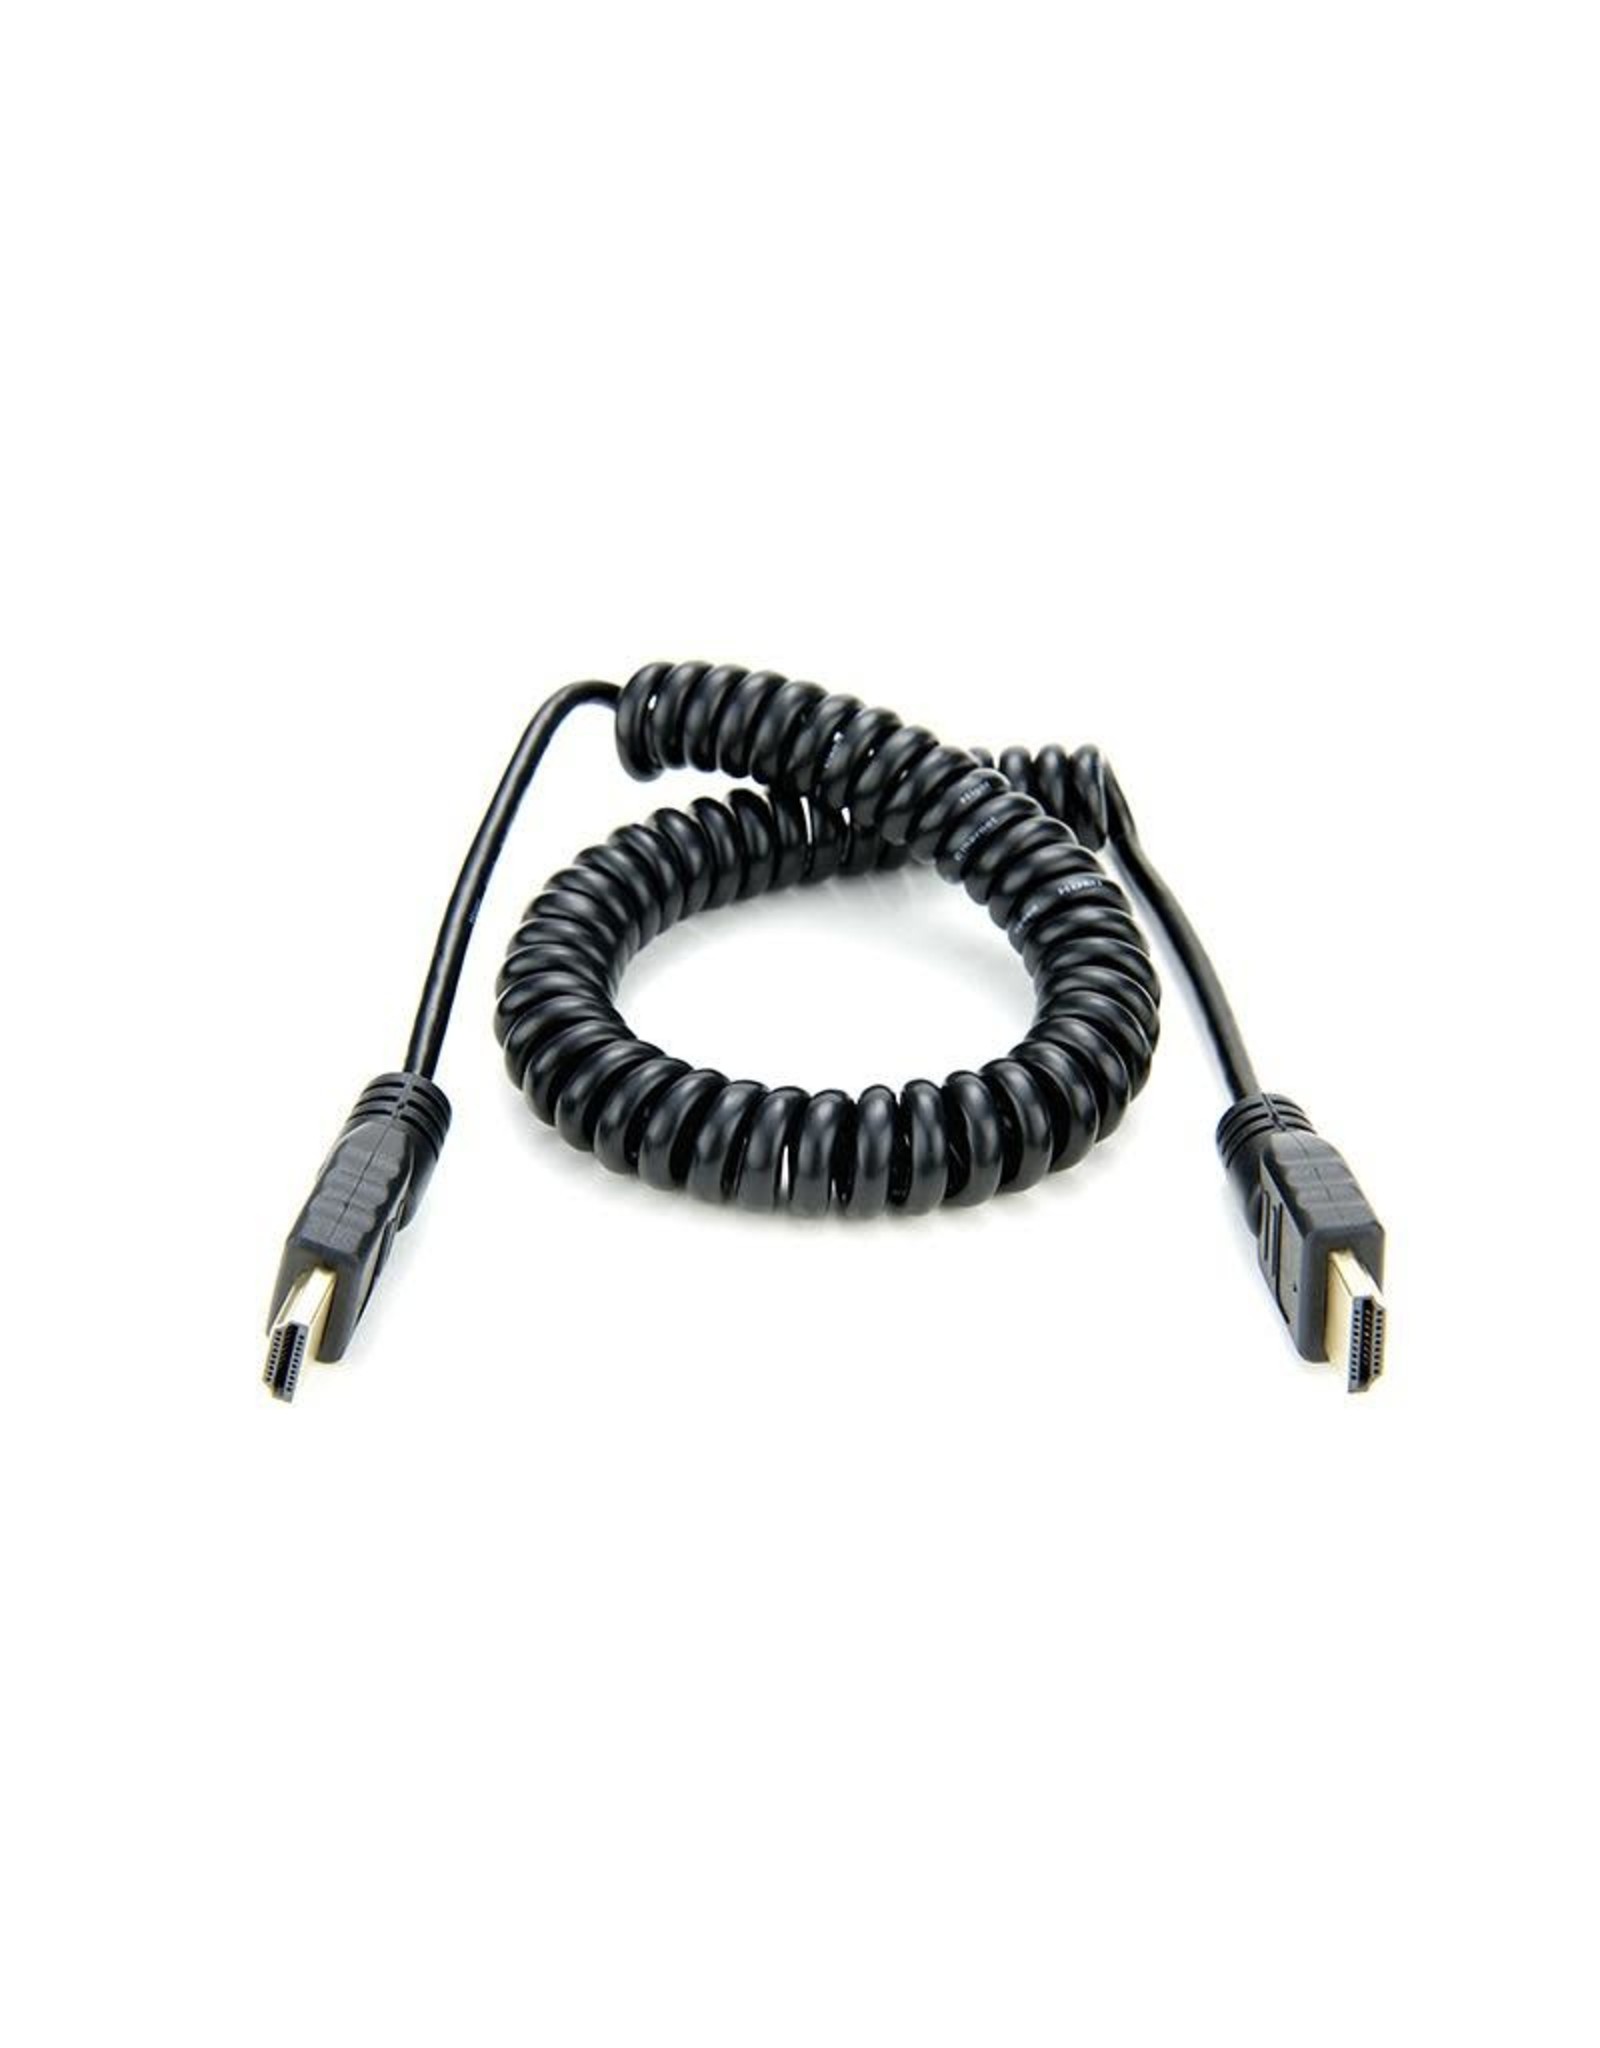 Atomos Atomos coiled Mini to Full HDMI cable in 50cm/19” length. Fits IQ4 150.